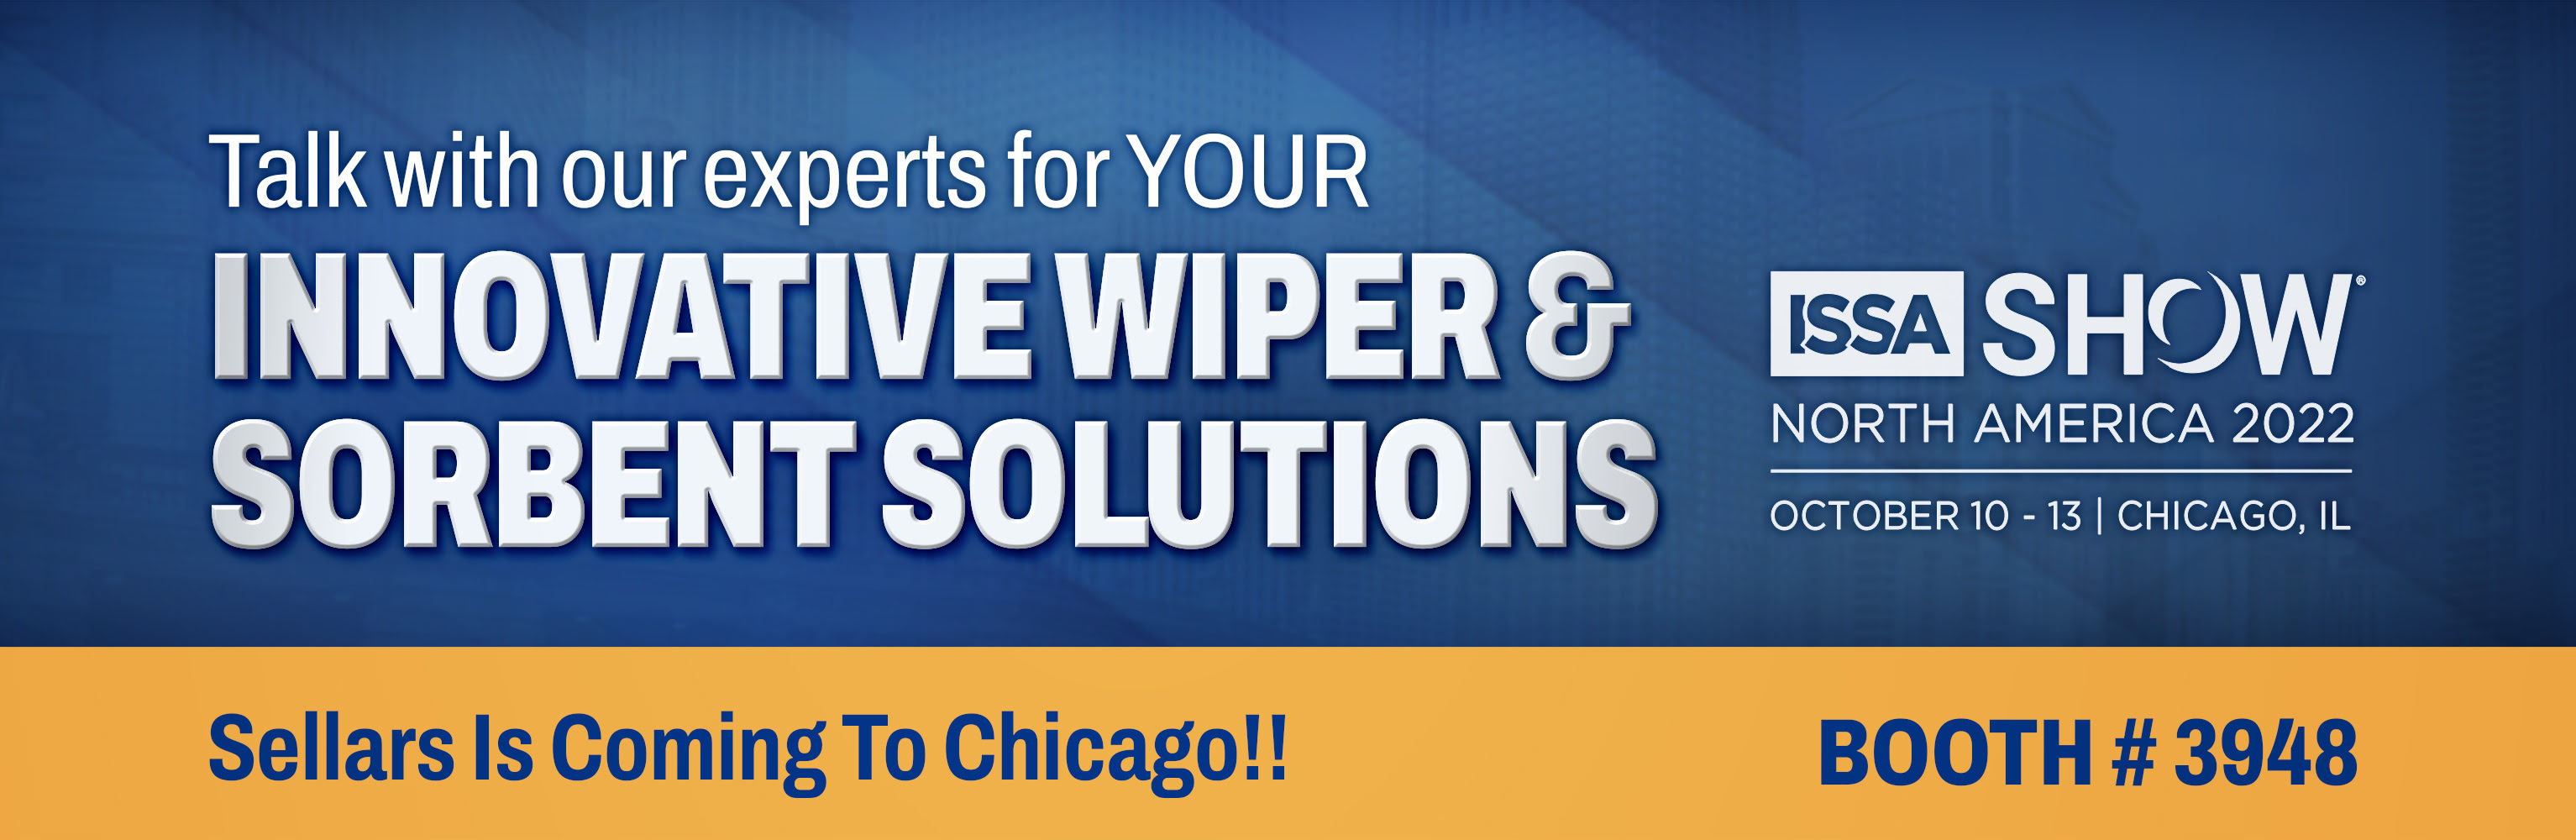 Innovative Wipers & Sorbent Solutions at ISSA Chicago